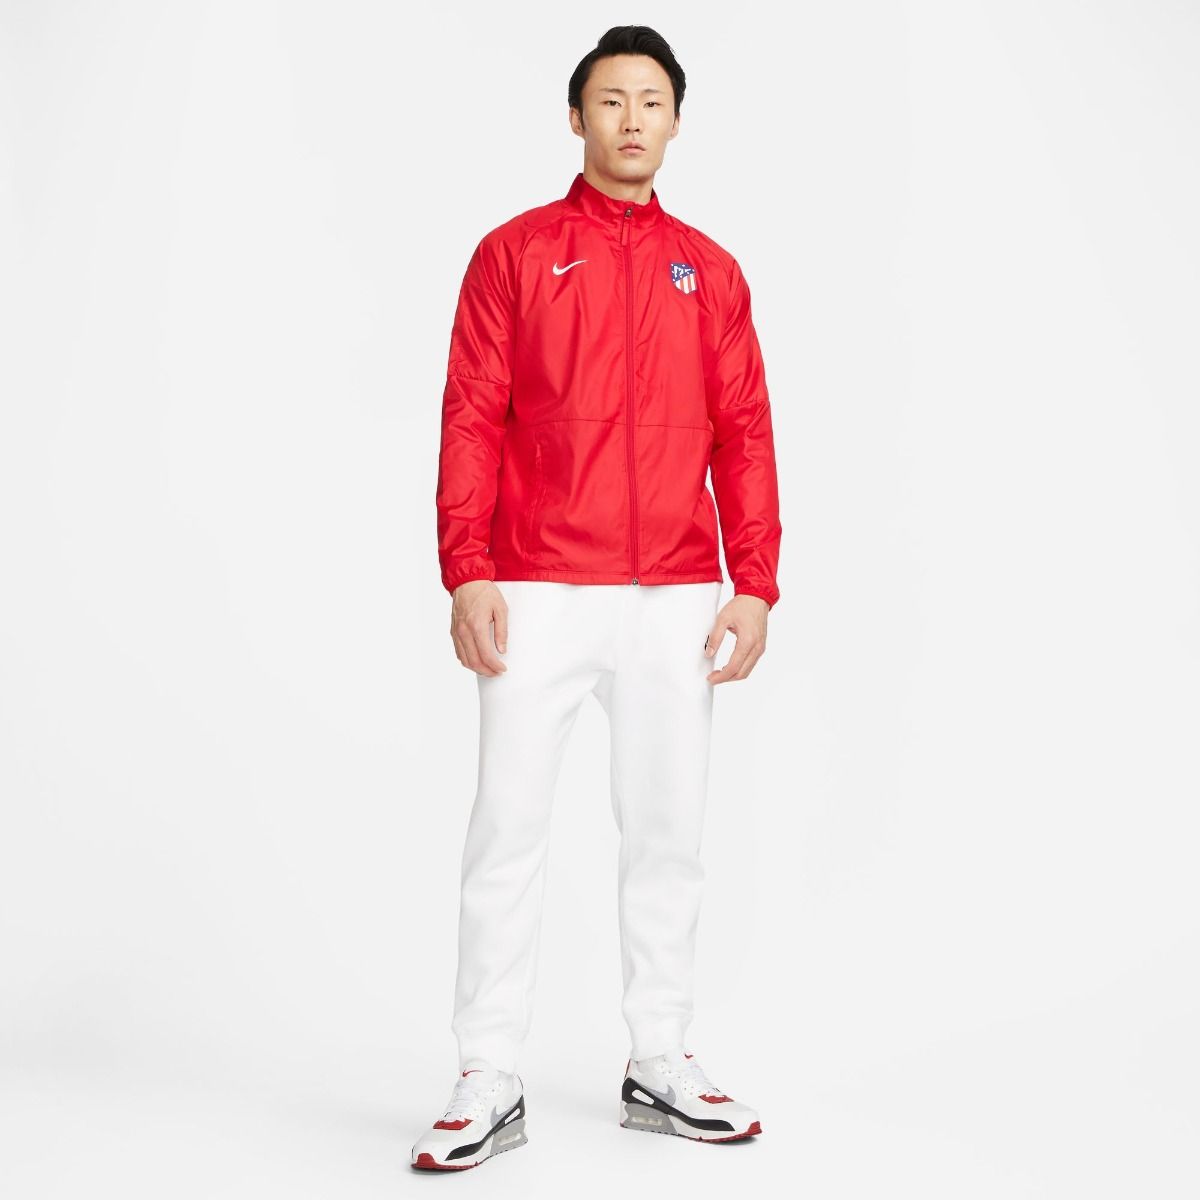 NIKE RED WINDPROOF JACKET image number null